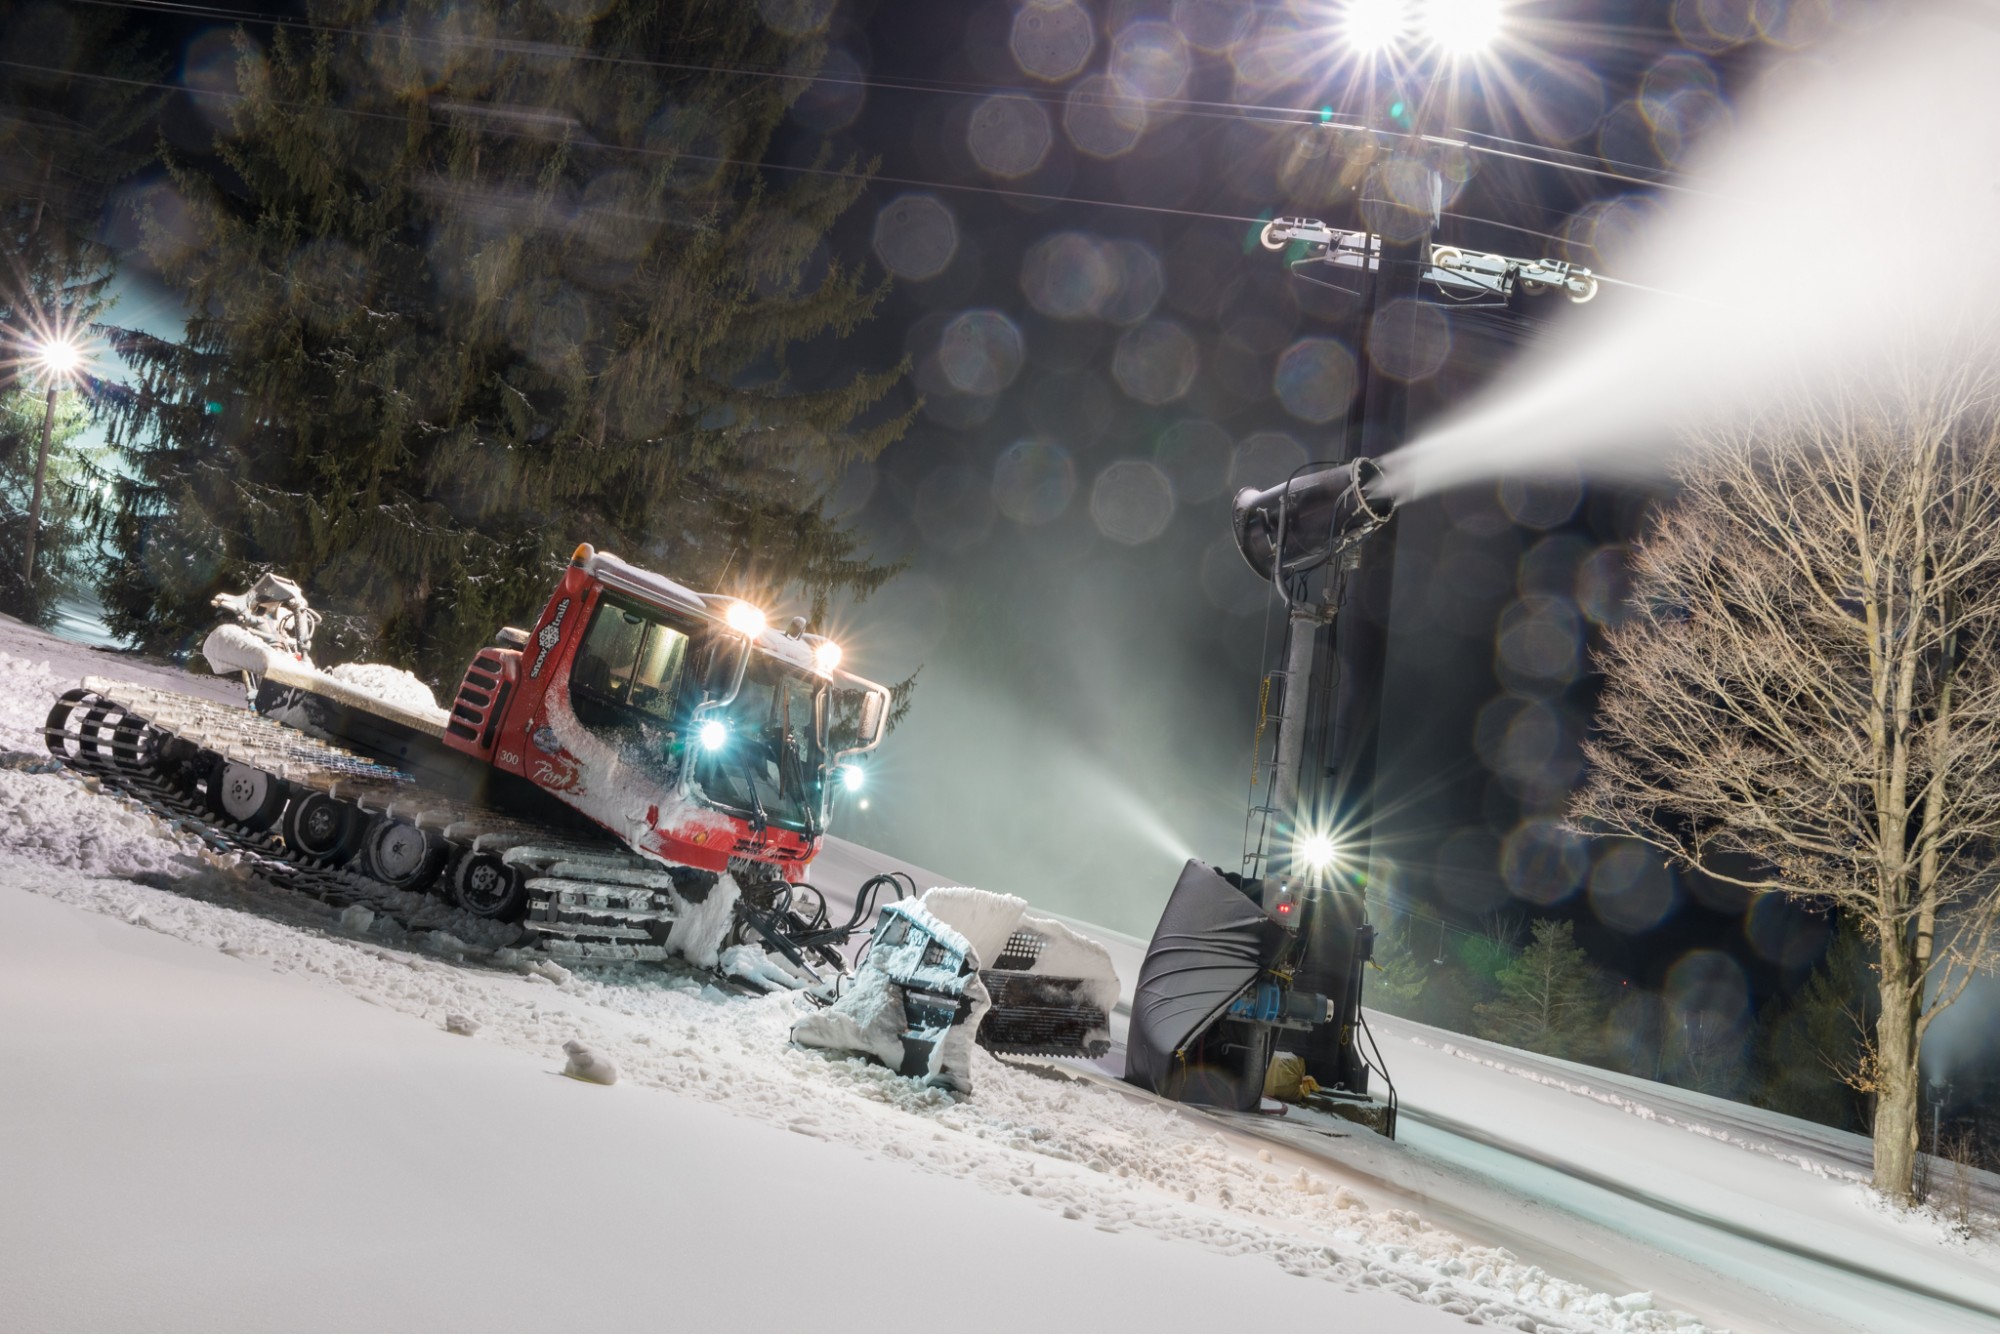 Snowmaking Continues in March, Never Before in Snow Trails History